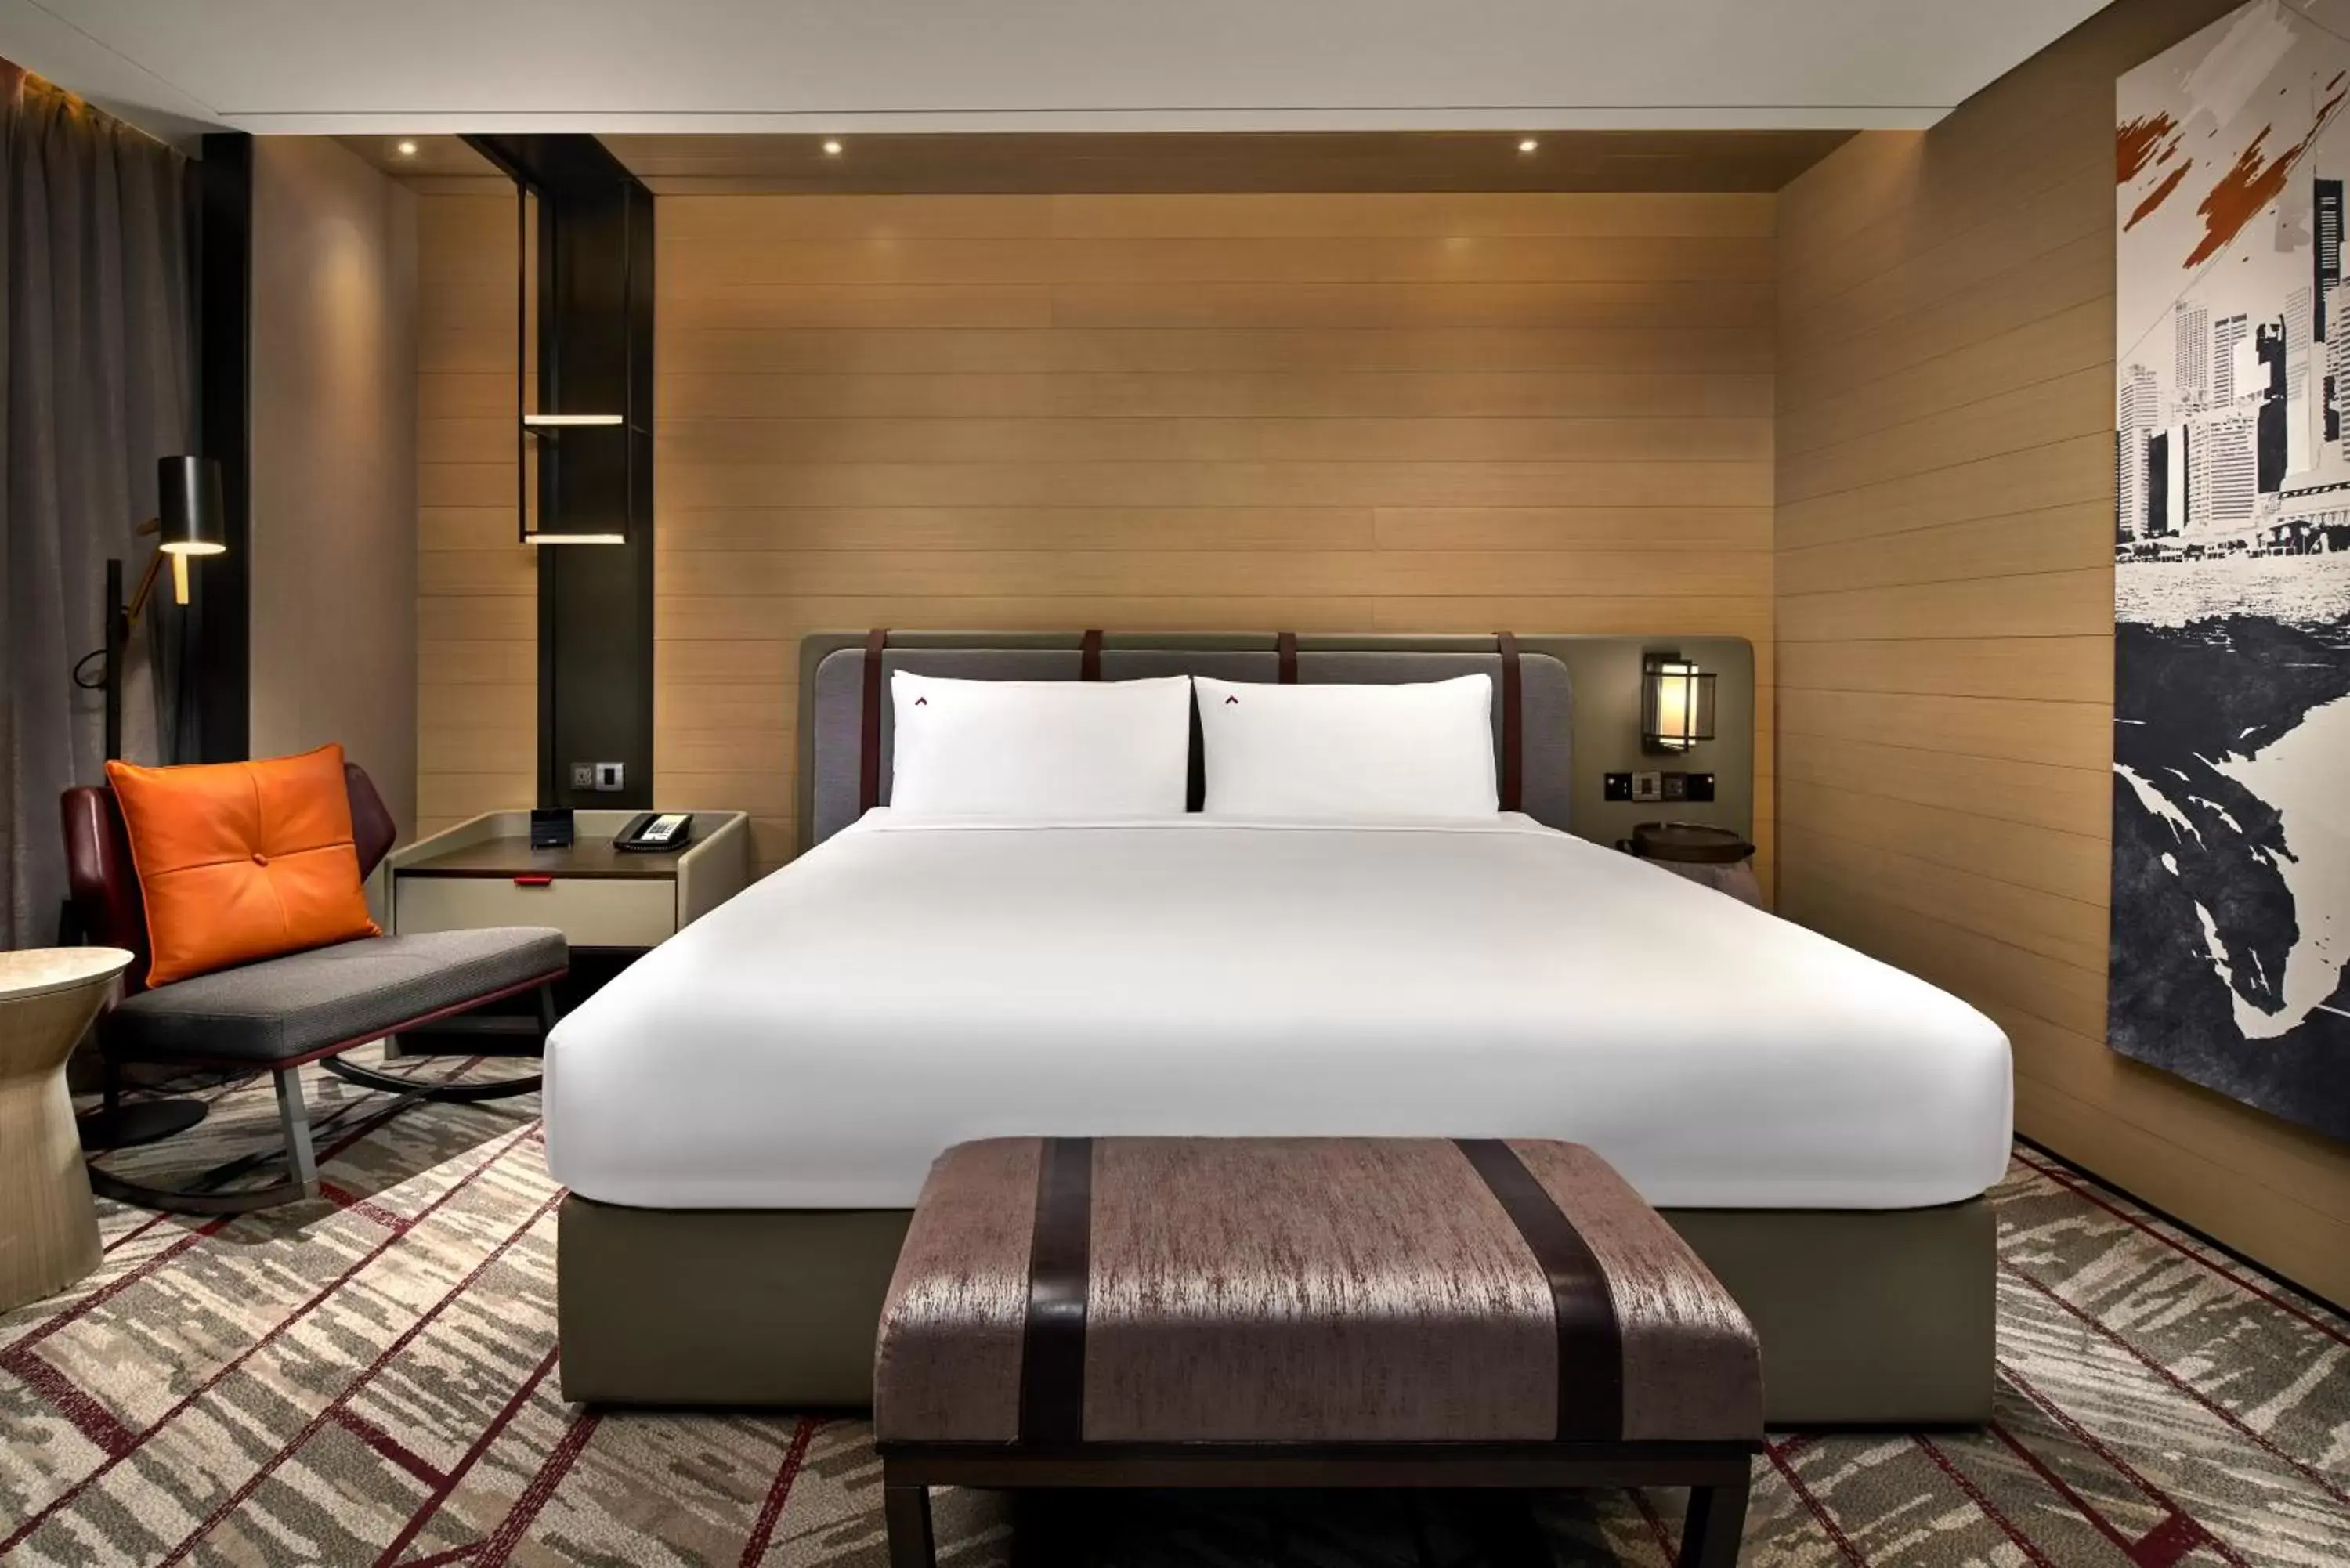 Premier King Room with Balcony and City View in Swissotel The Stamford